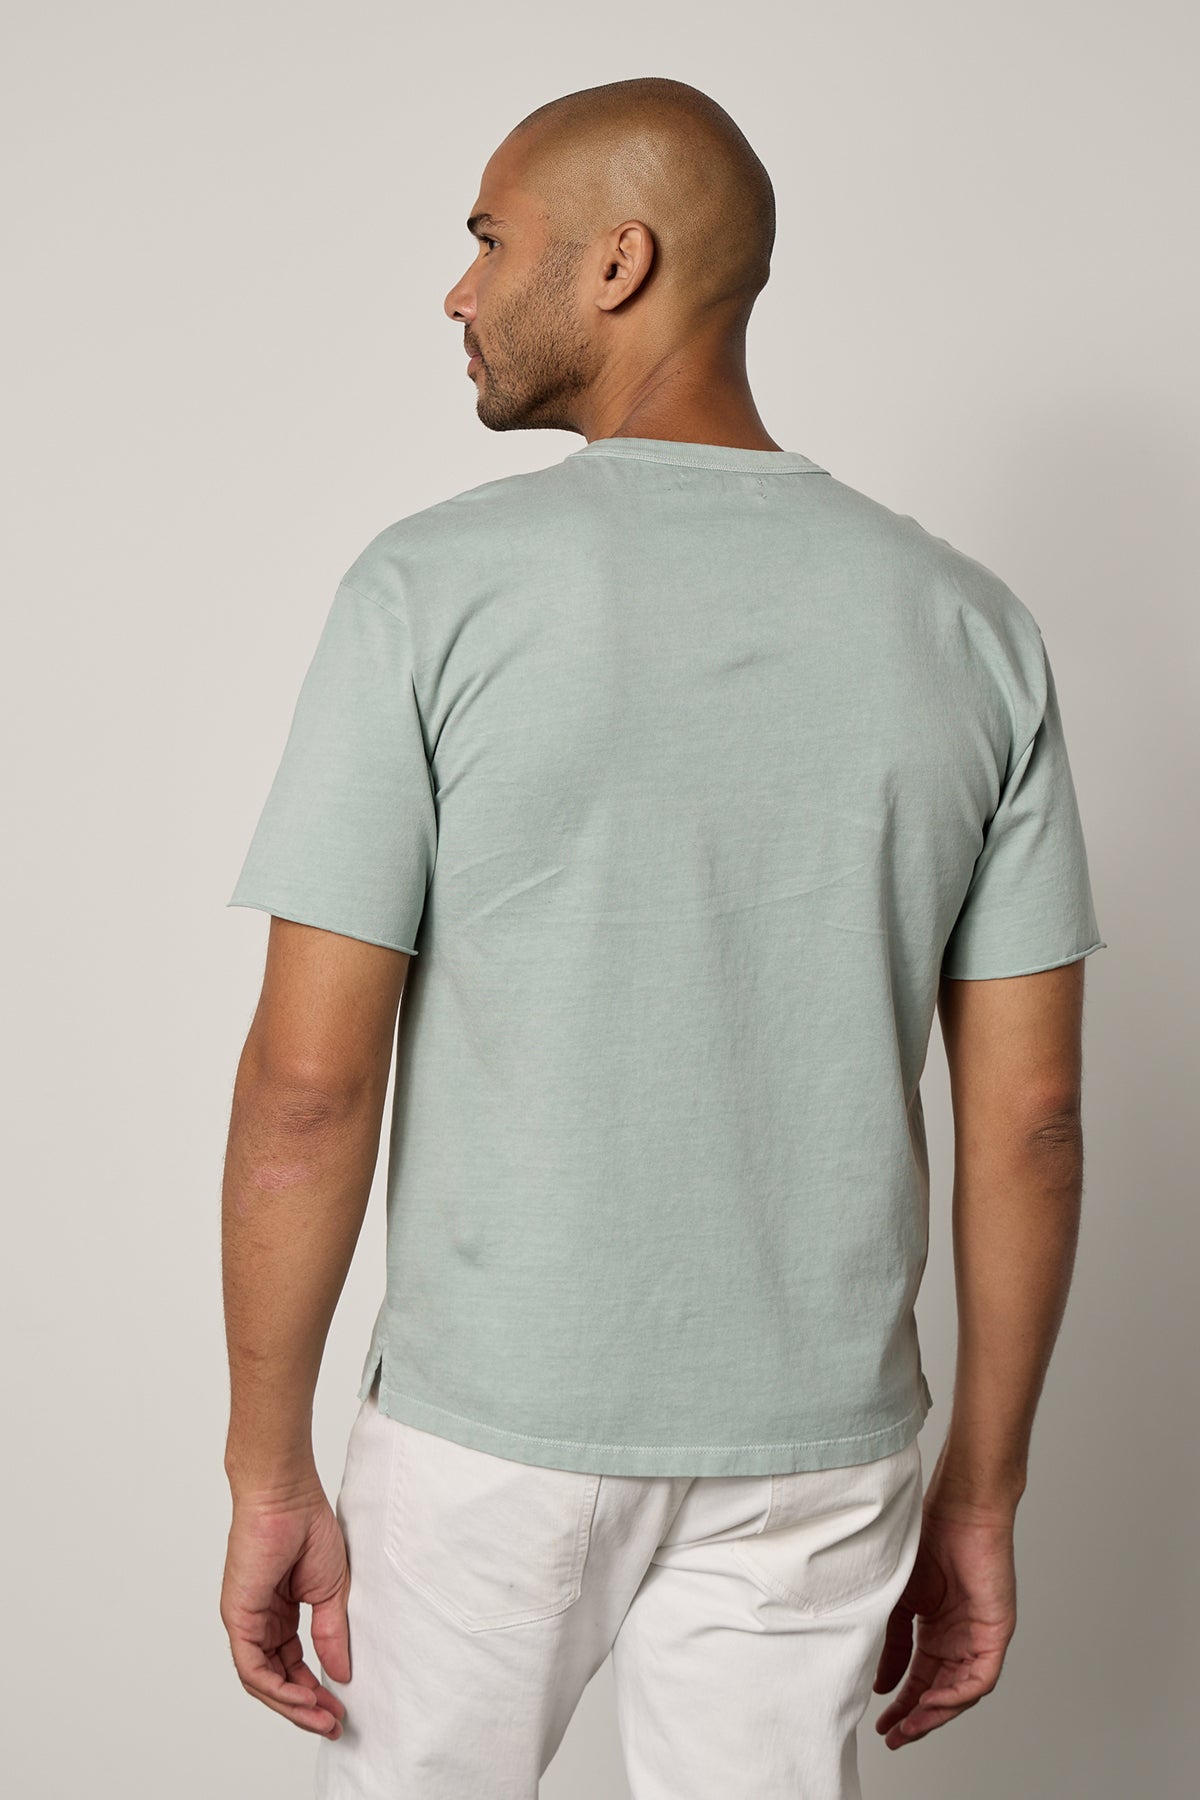 Beau Tee in mint green with white denim back-26255337685185